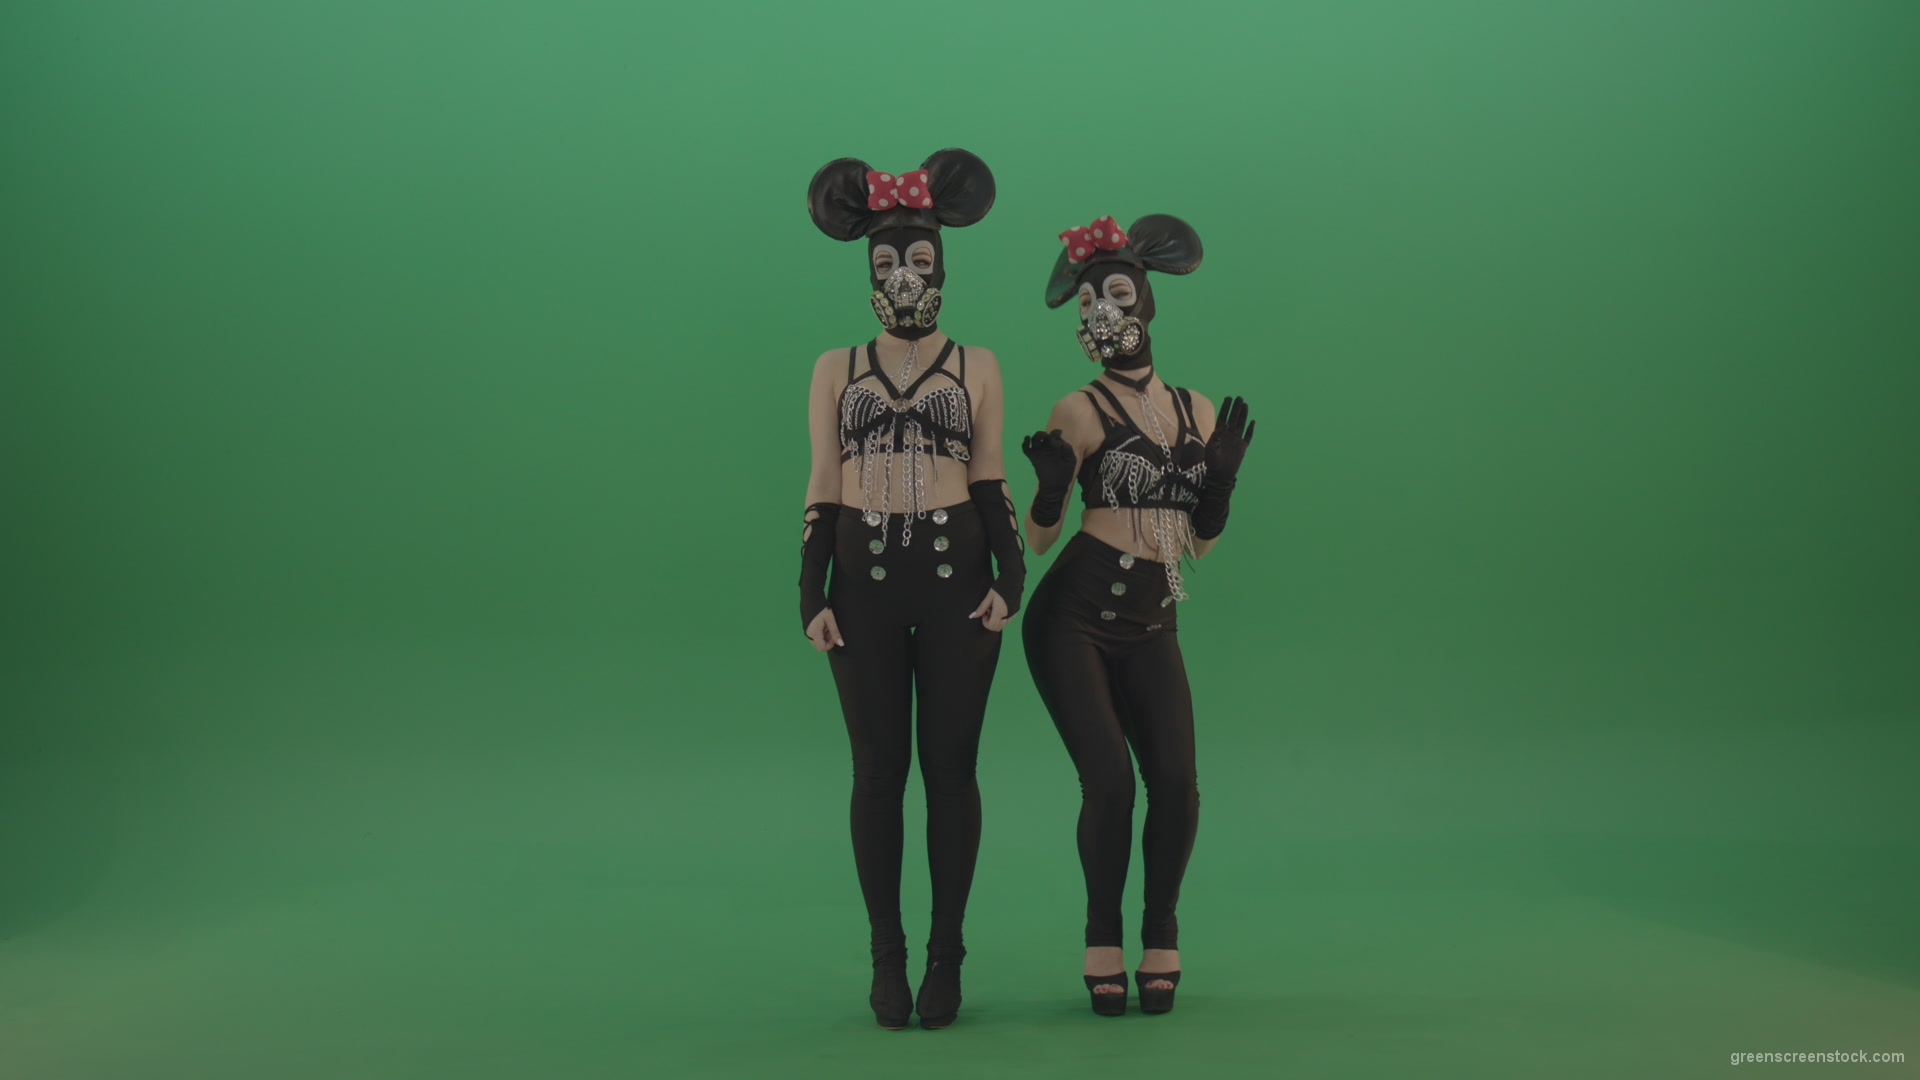 Two-girls-dressed-in-Mickey-Mouse-sit-squarelyon-green-screen_006 Green Screen Stock